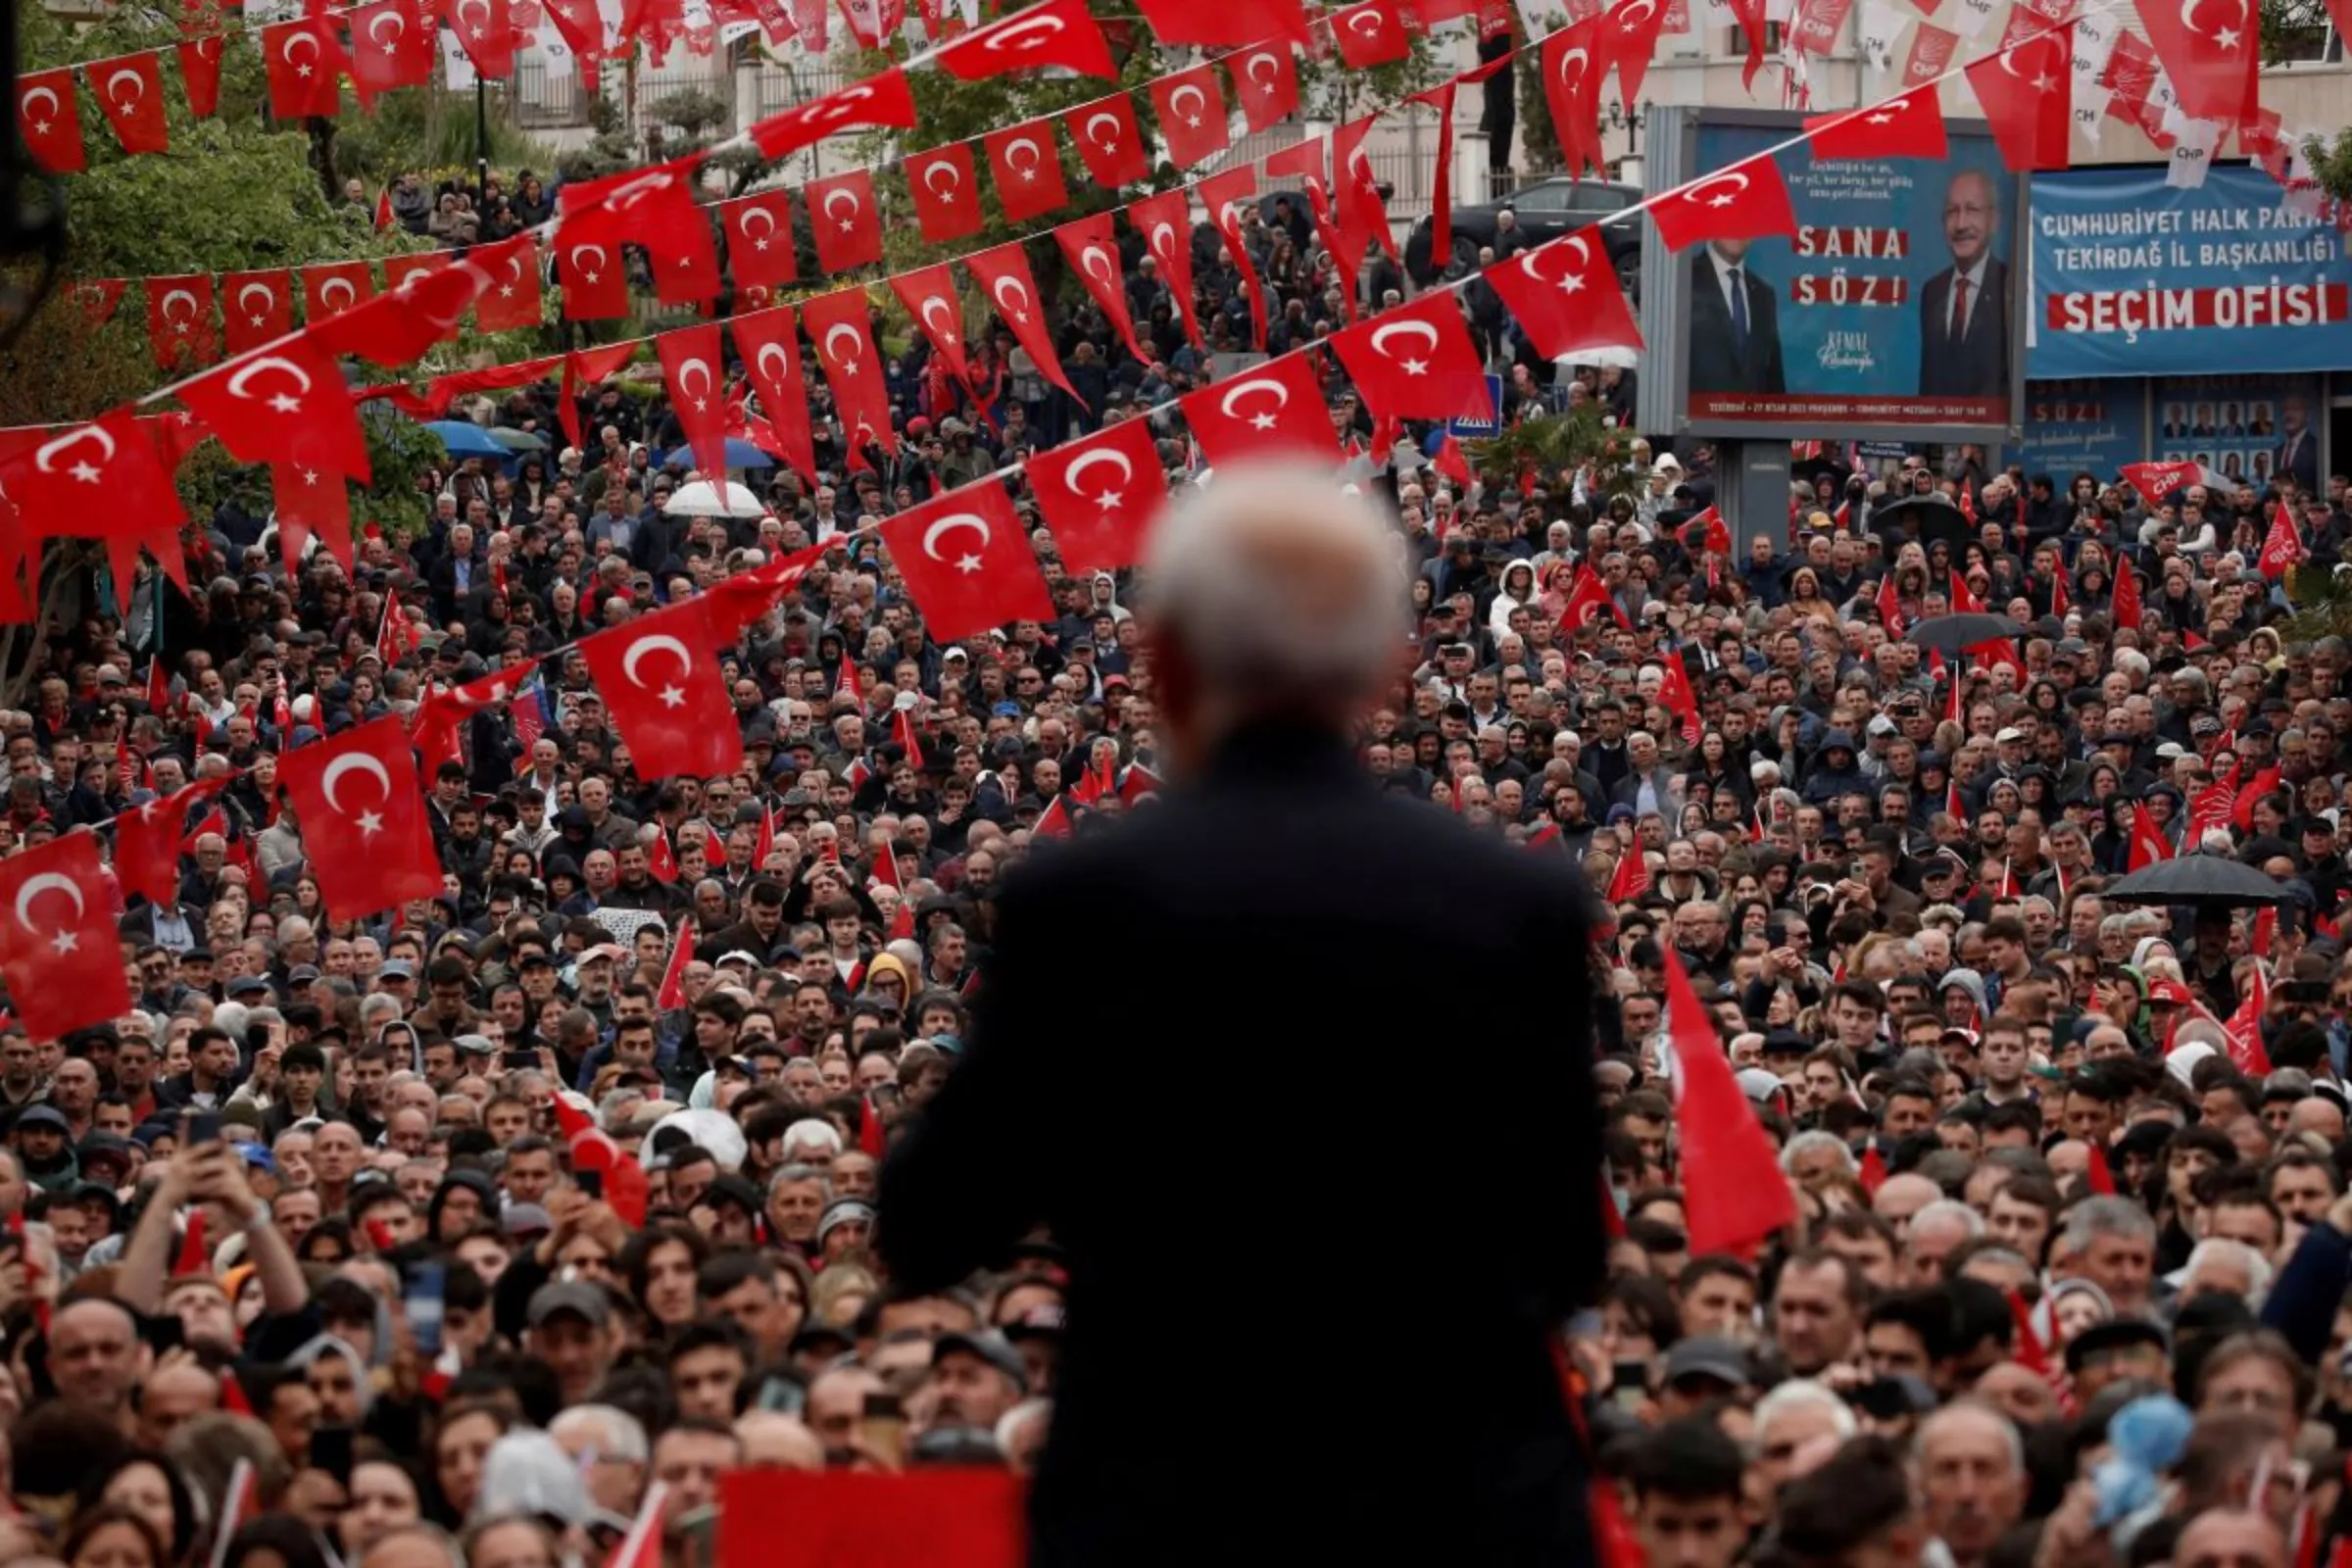 Kemal Kilicdaroglu, presidential candidate of Turkey's main opposition alliance, addresses his supporters during a rally ahead of the May 14 presidential and parliamentary elections, in Tekirdag, Turkey April 27, 2023